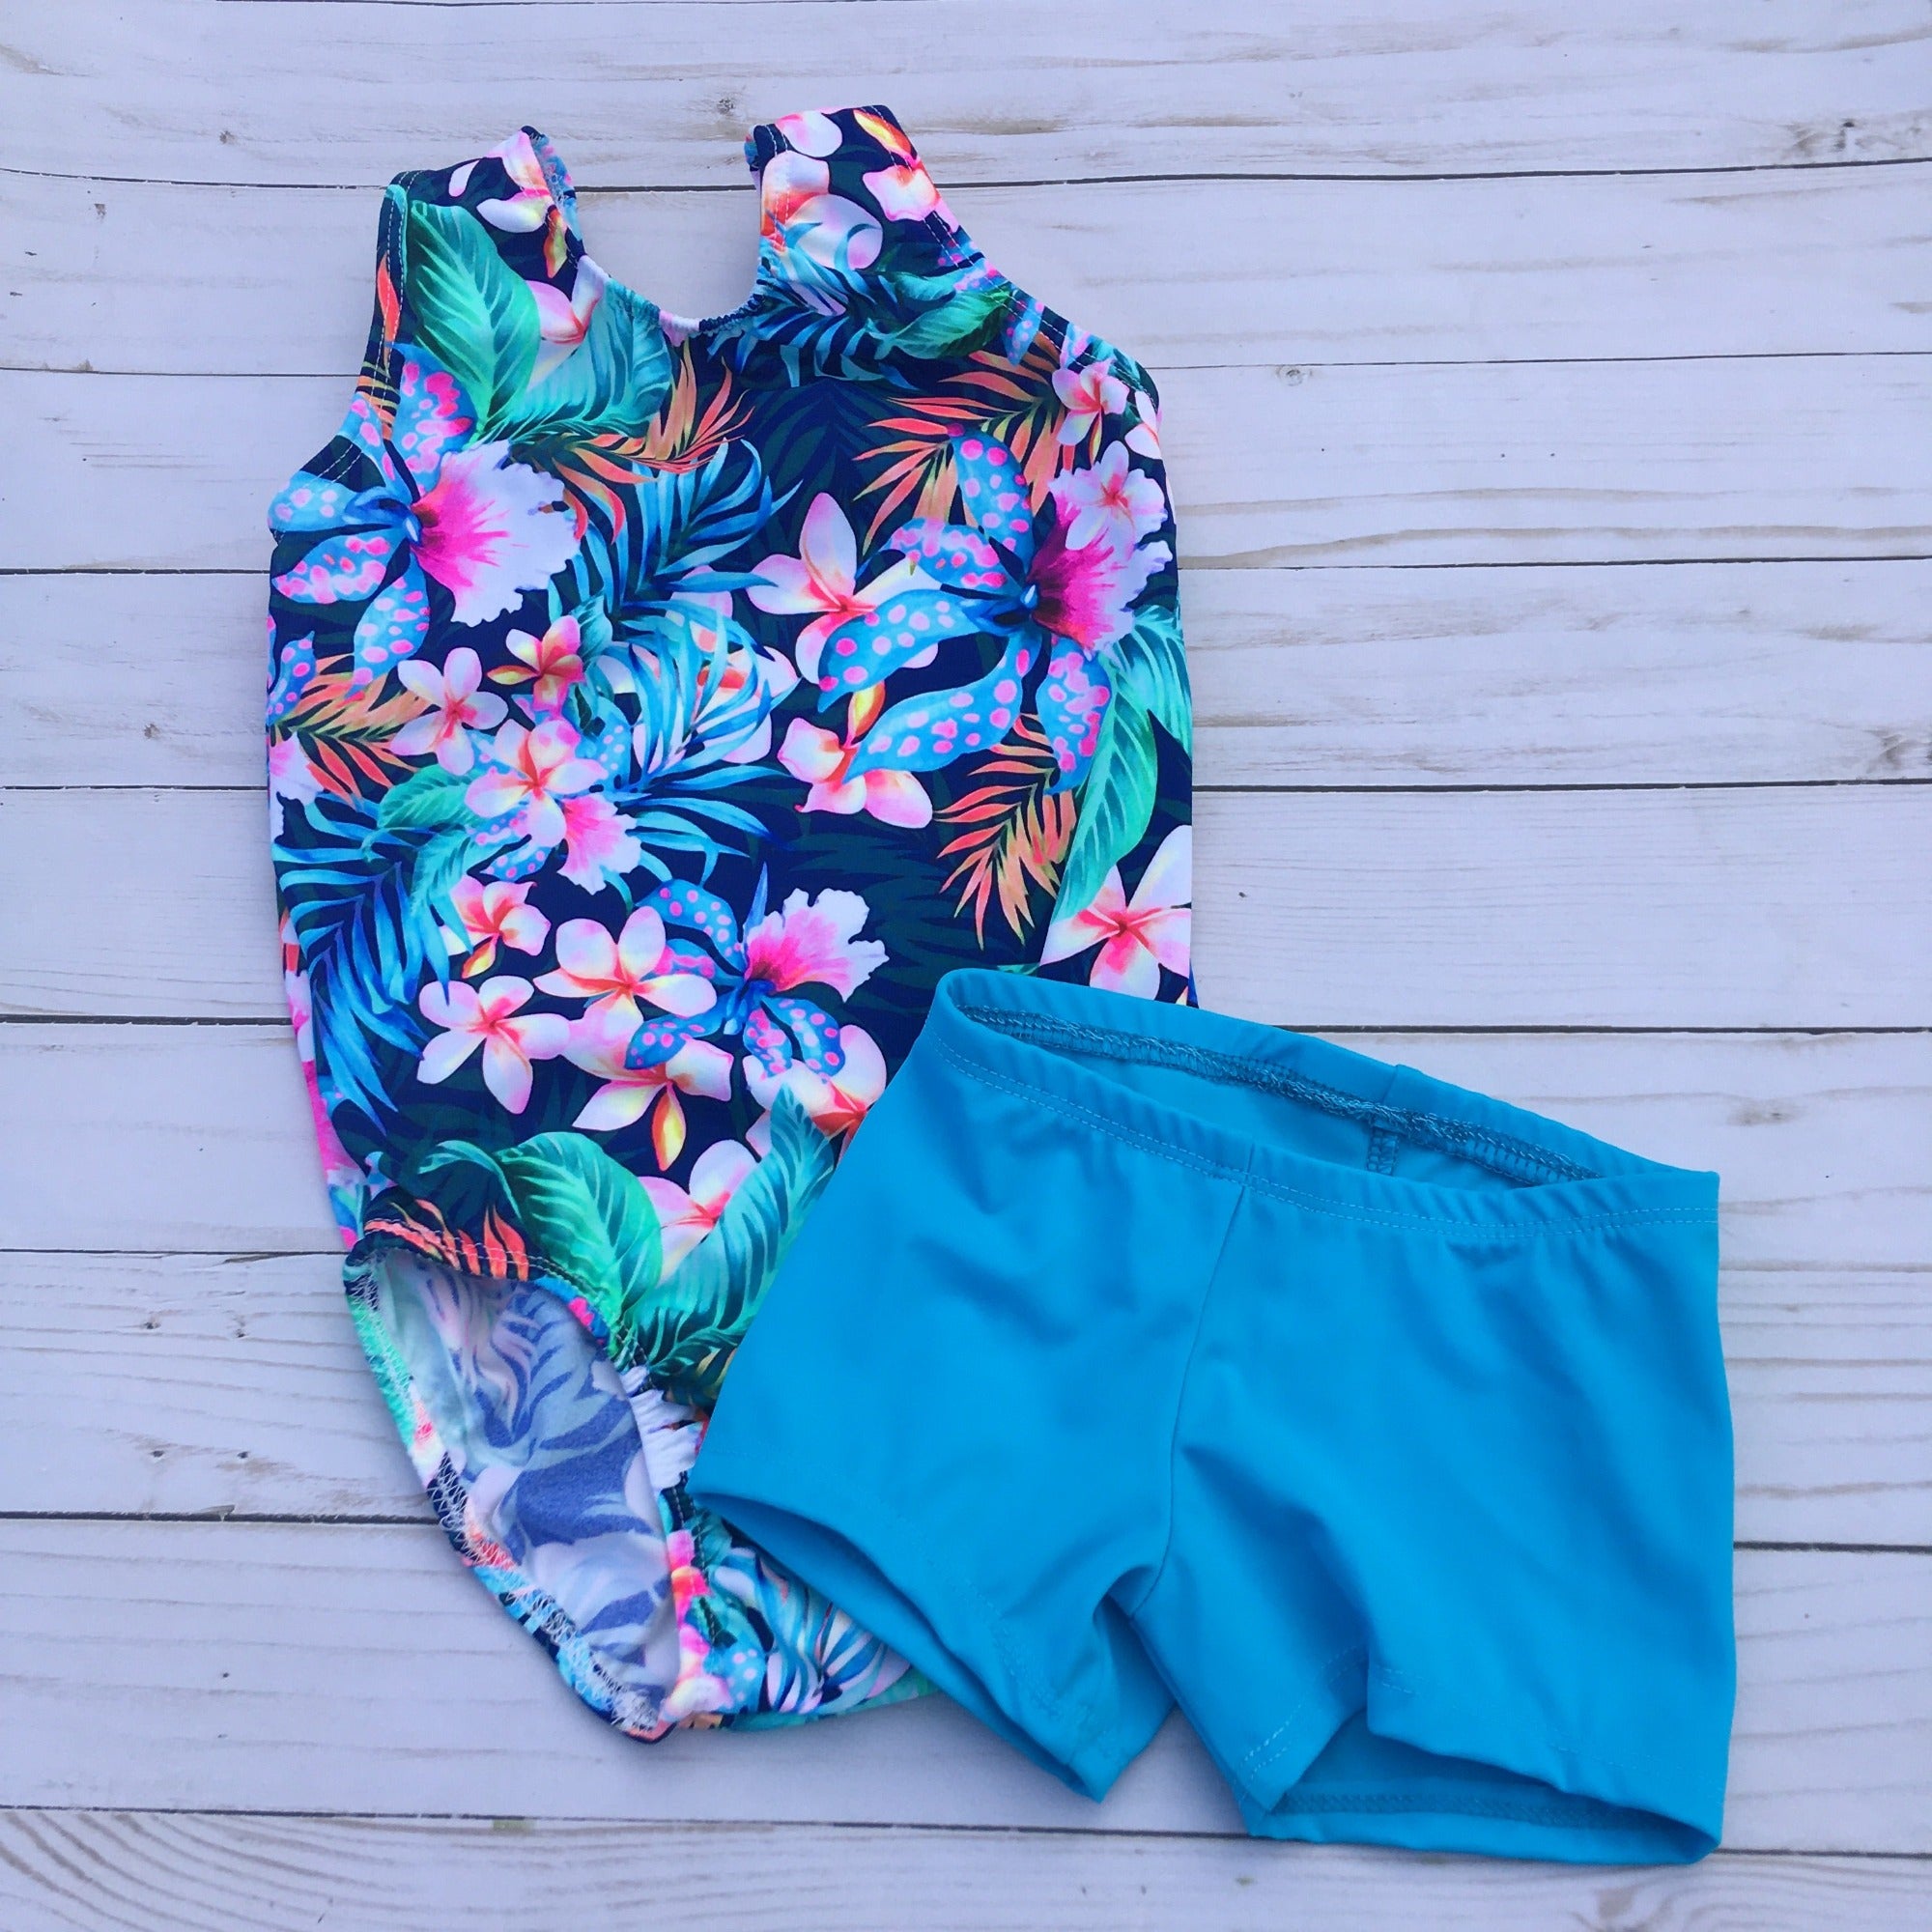 bright floral tank gymnastic leotard with coordinating turquoise shorts